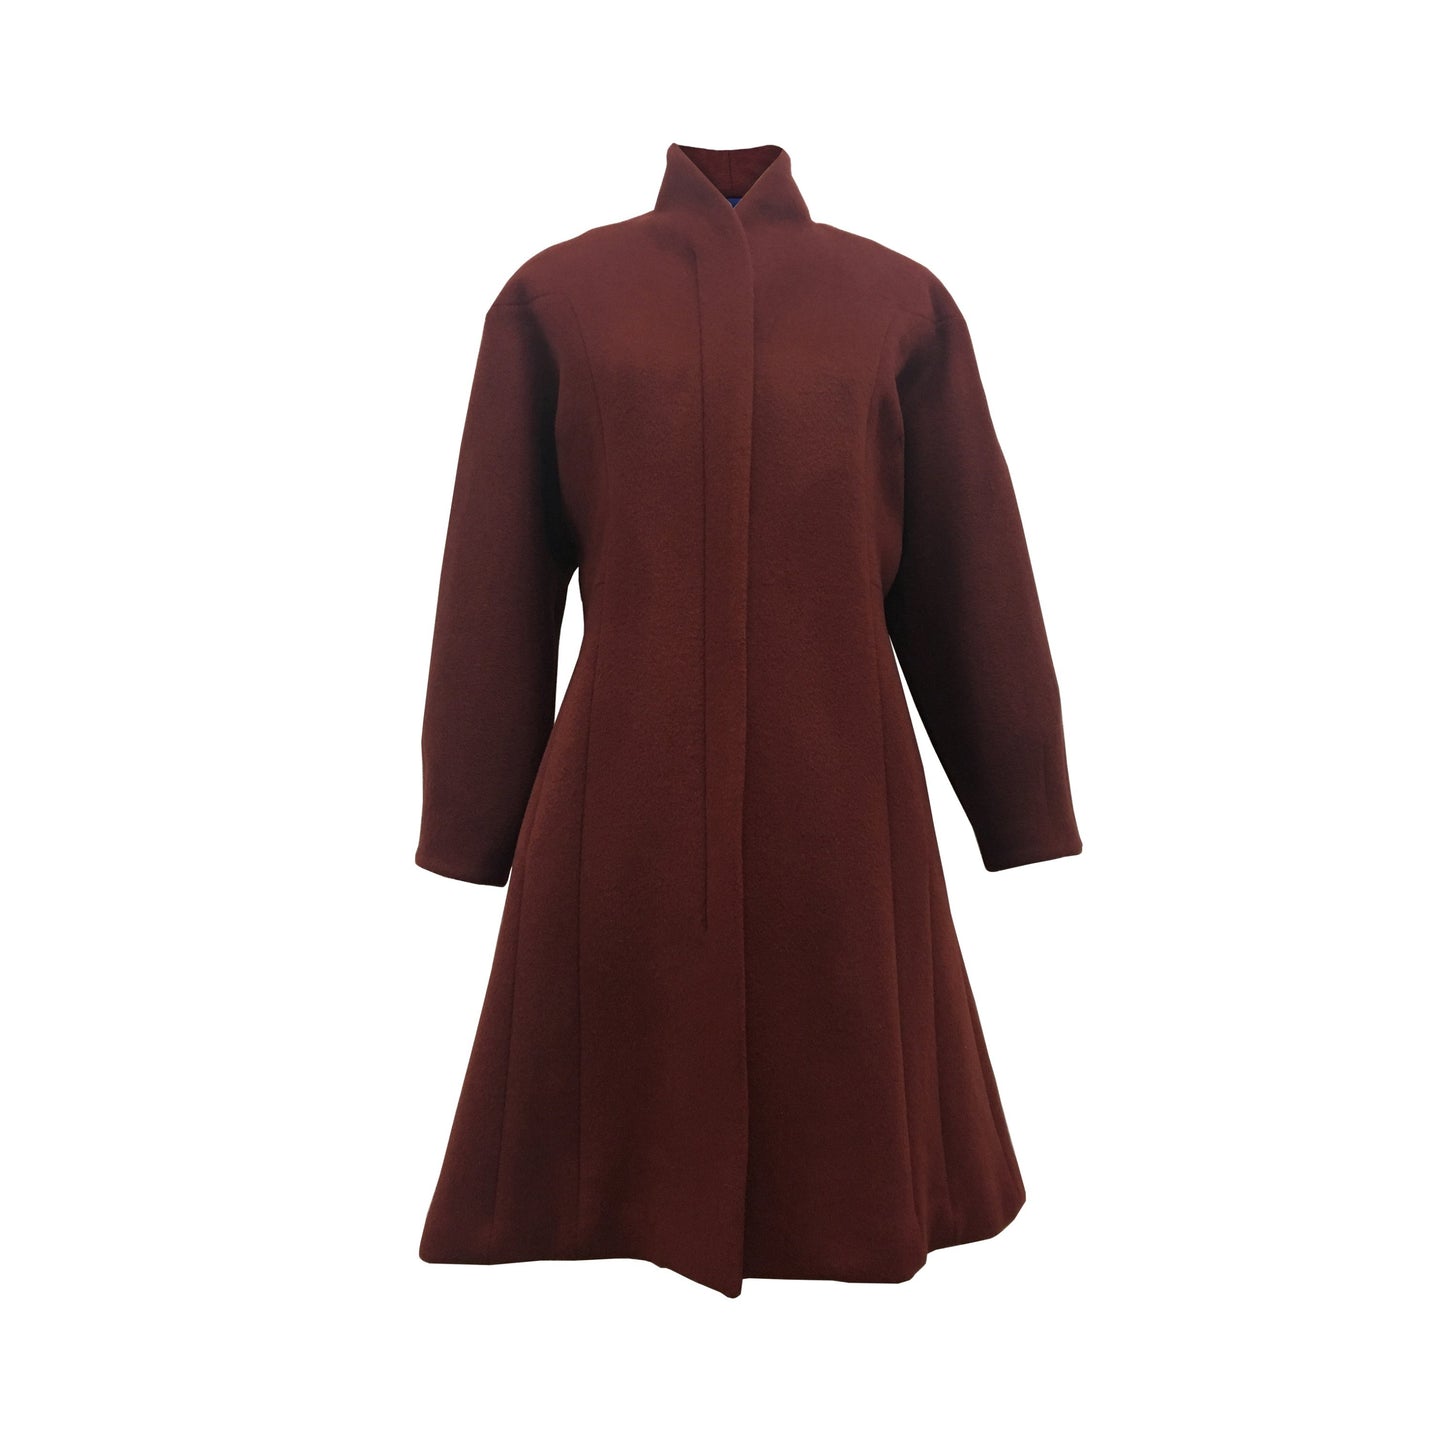 Structured fit-and-flare wool coat with shaped seam lines and funnel neck in Cinnamon Bark